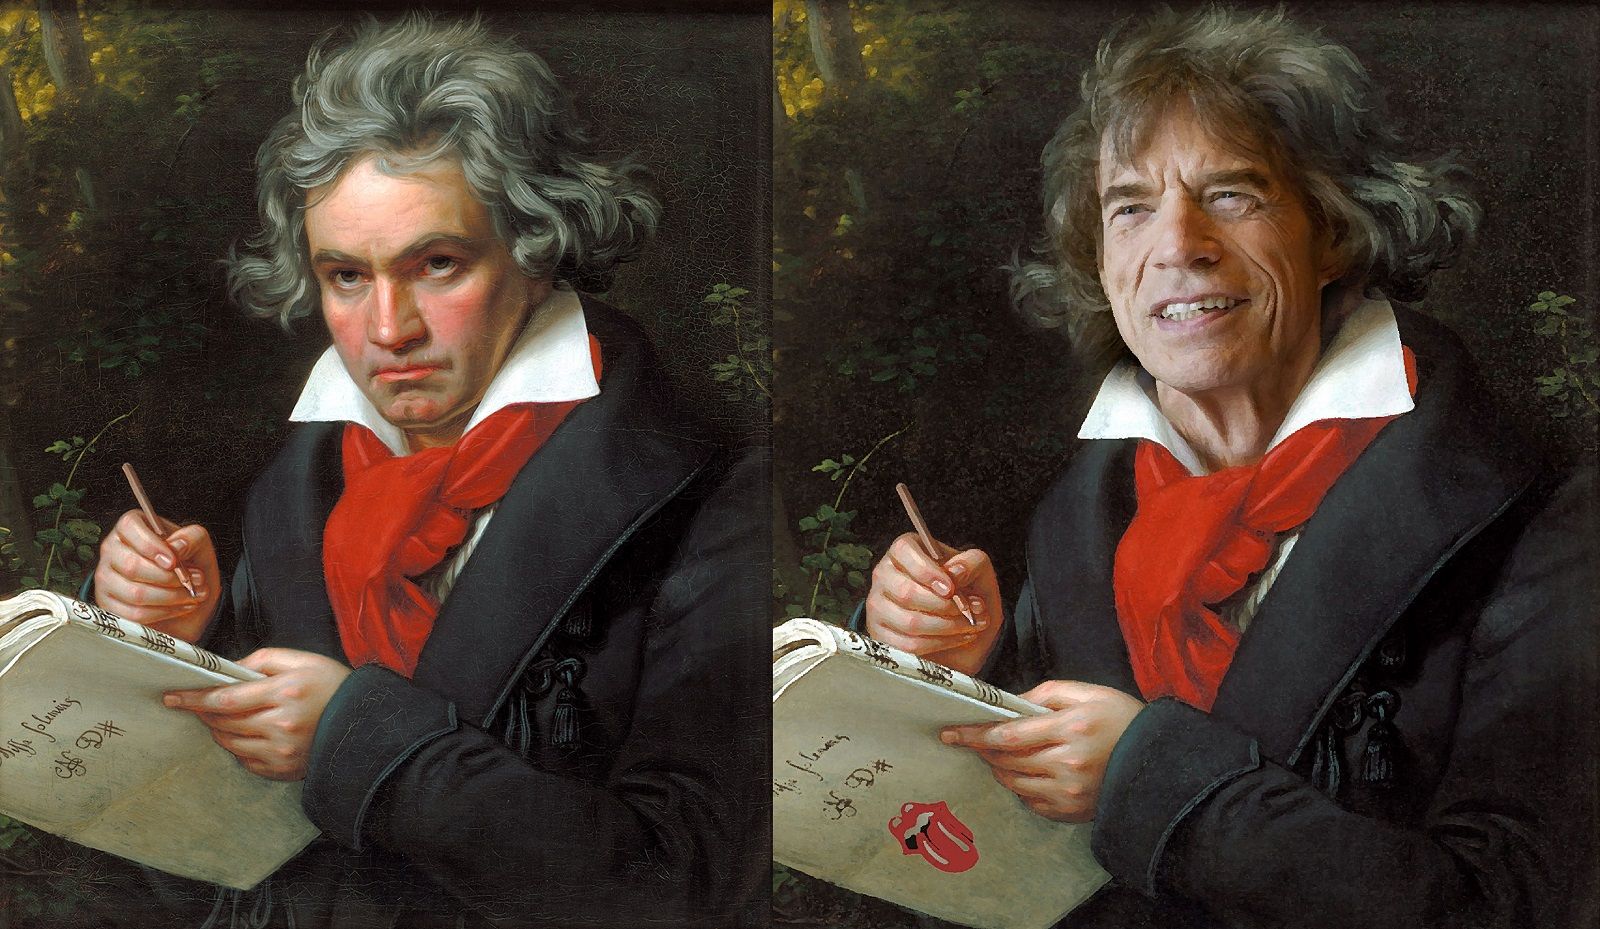 Hilarious images of celebrities Photoshopped into Renaissance paintings image 2